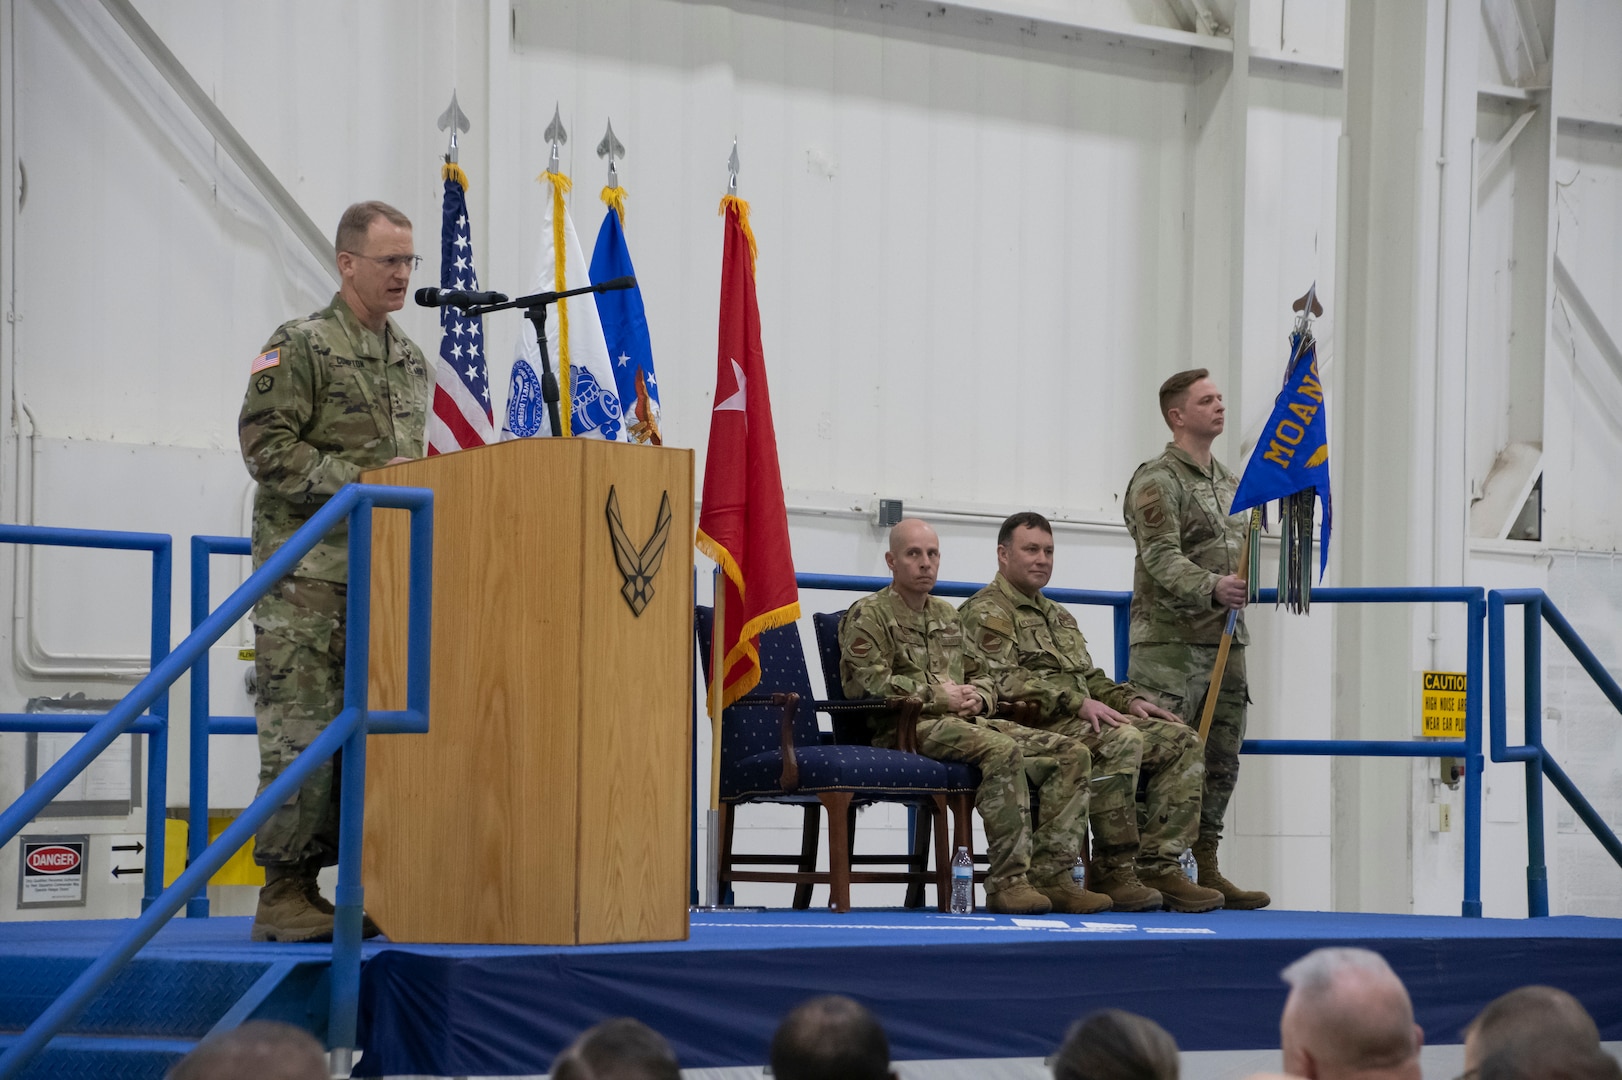 Maj. Gen. Levon Cumpton, Adjutant General of the Missouri National Guard, delivers remarks during a 131st Bomb Wing change of command ceremony at Whiteman Air Force Base, Missouri, Feb. 3, 2023. During the ceremony Col. Jared P. Kennish assumed command of the 131st Bomb Wing from Col. Matthew D. Calhoun. (U.S. Air National Guard photo by Senior Airman Kelly C. Ferguson)